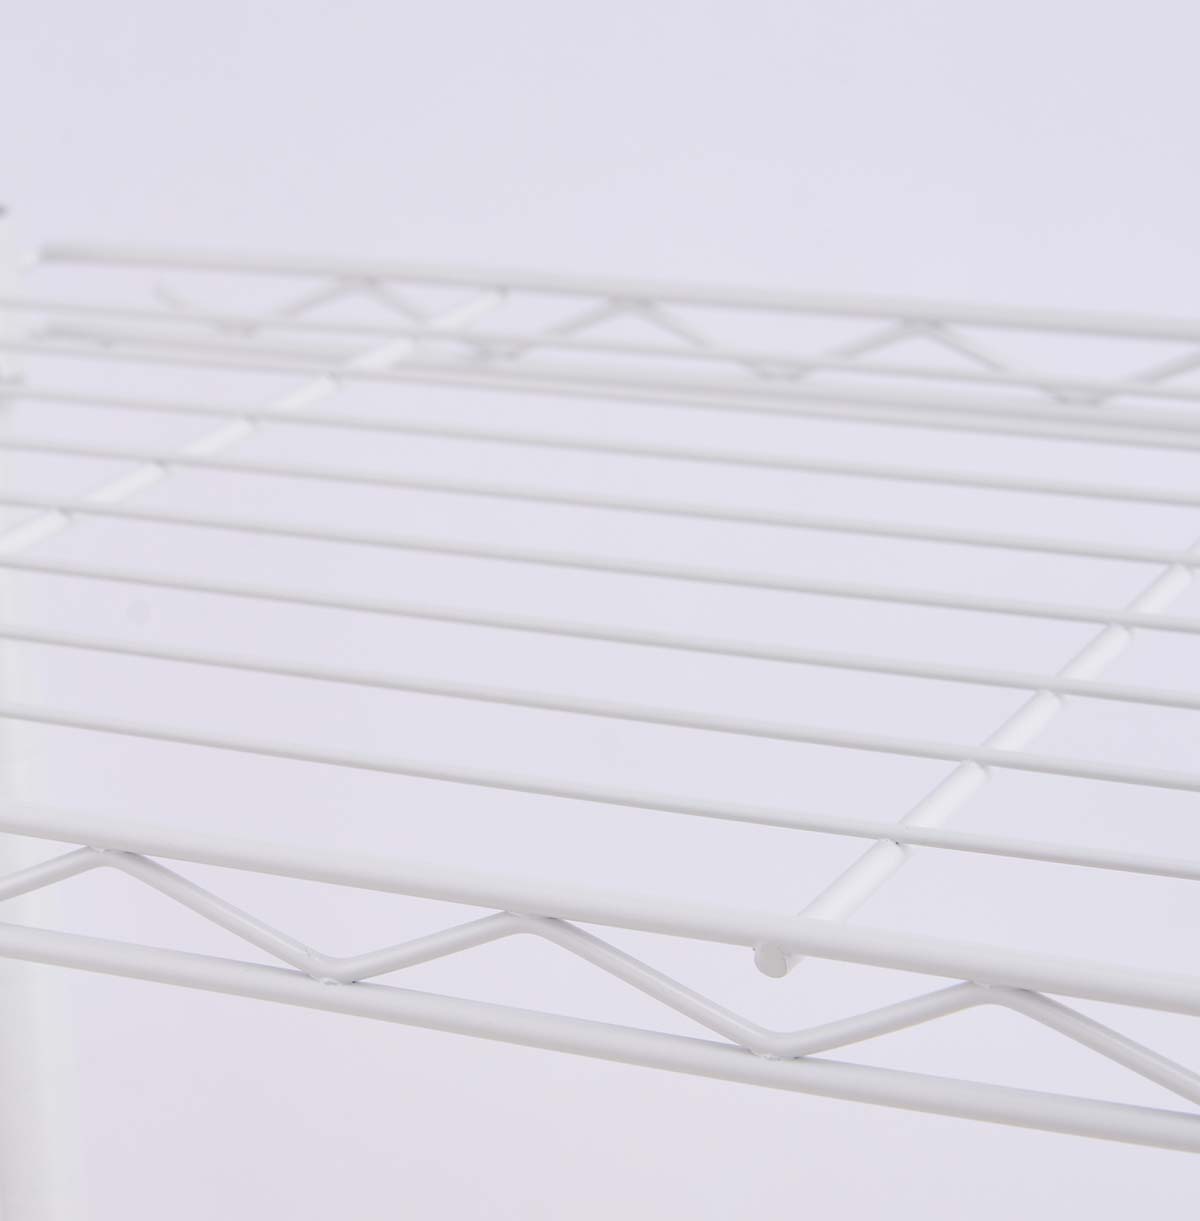 stainless steel wire shelf rack manufacture